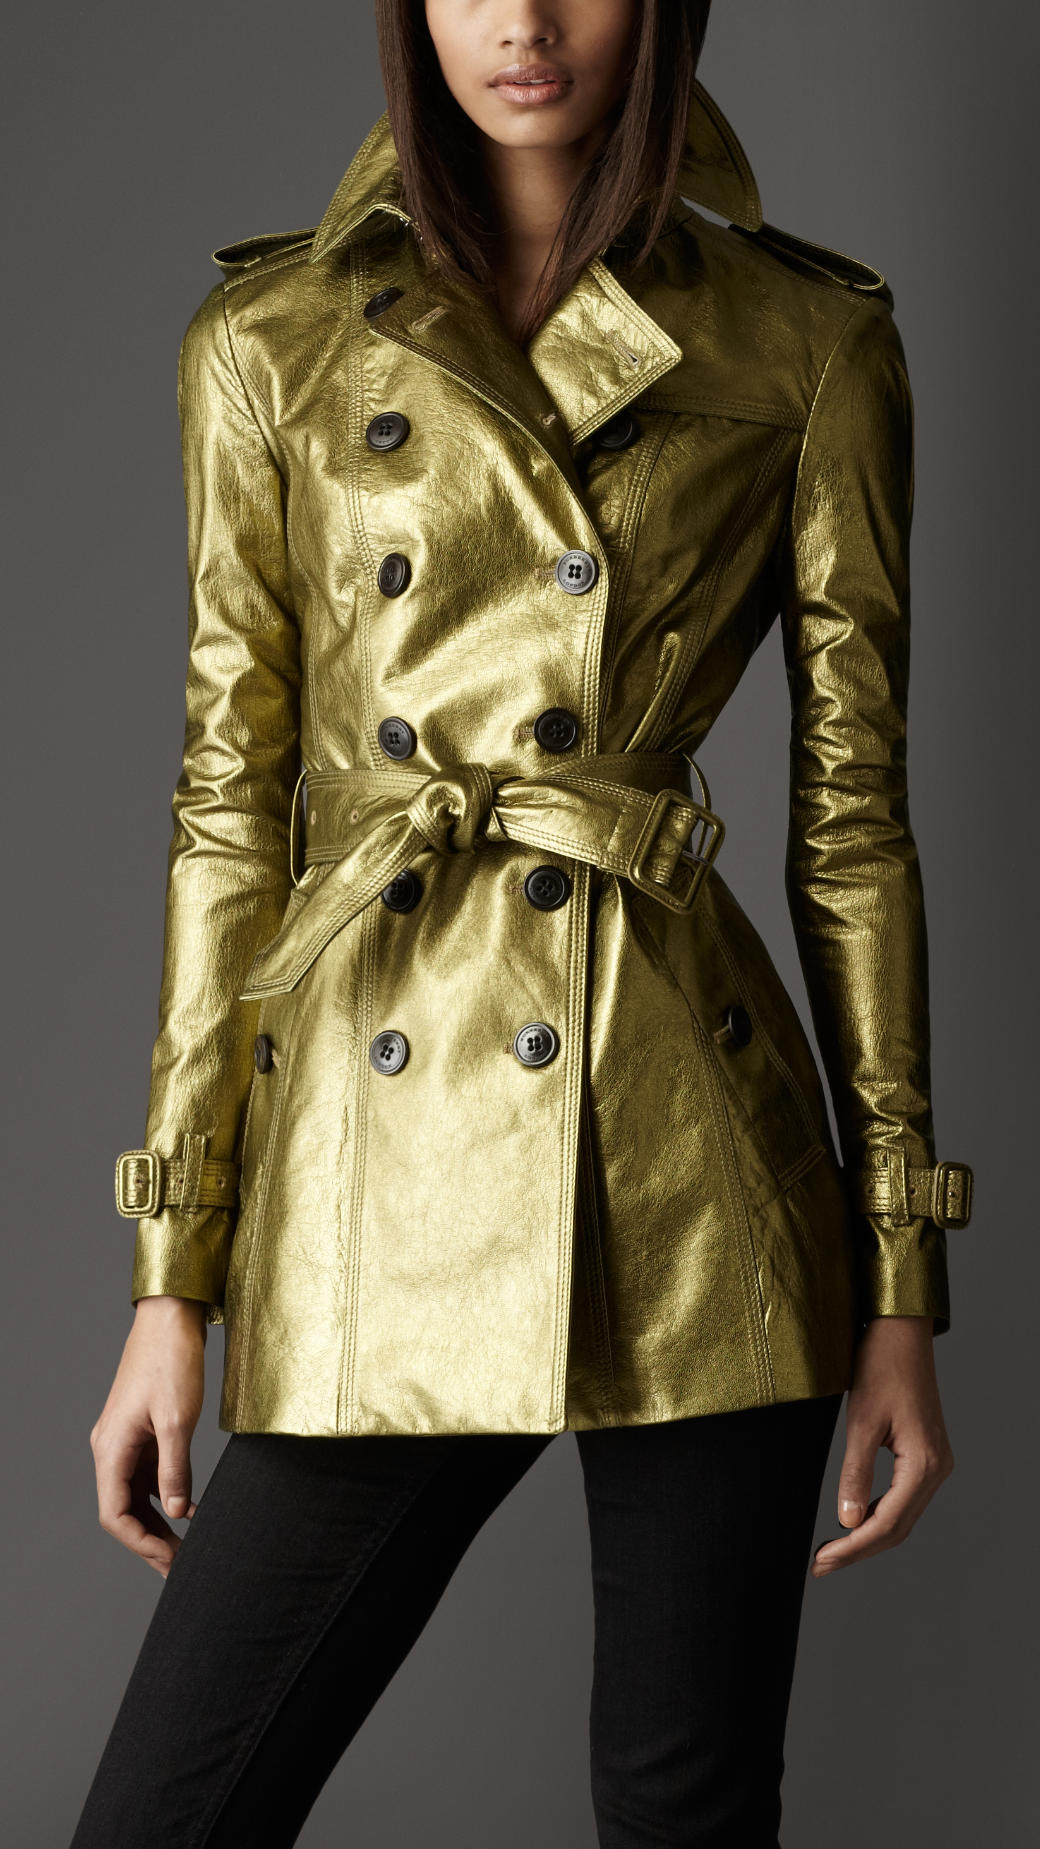 Lyst - Burberry Short Metallic Leather Trench Coat in Green